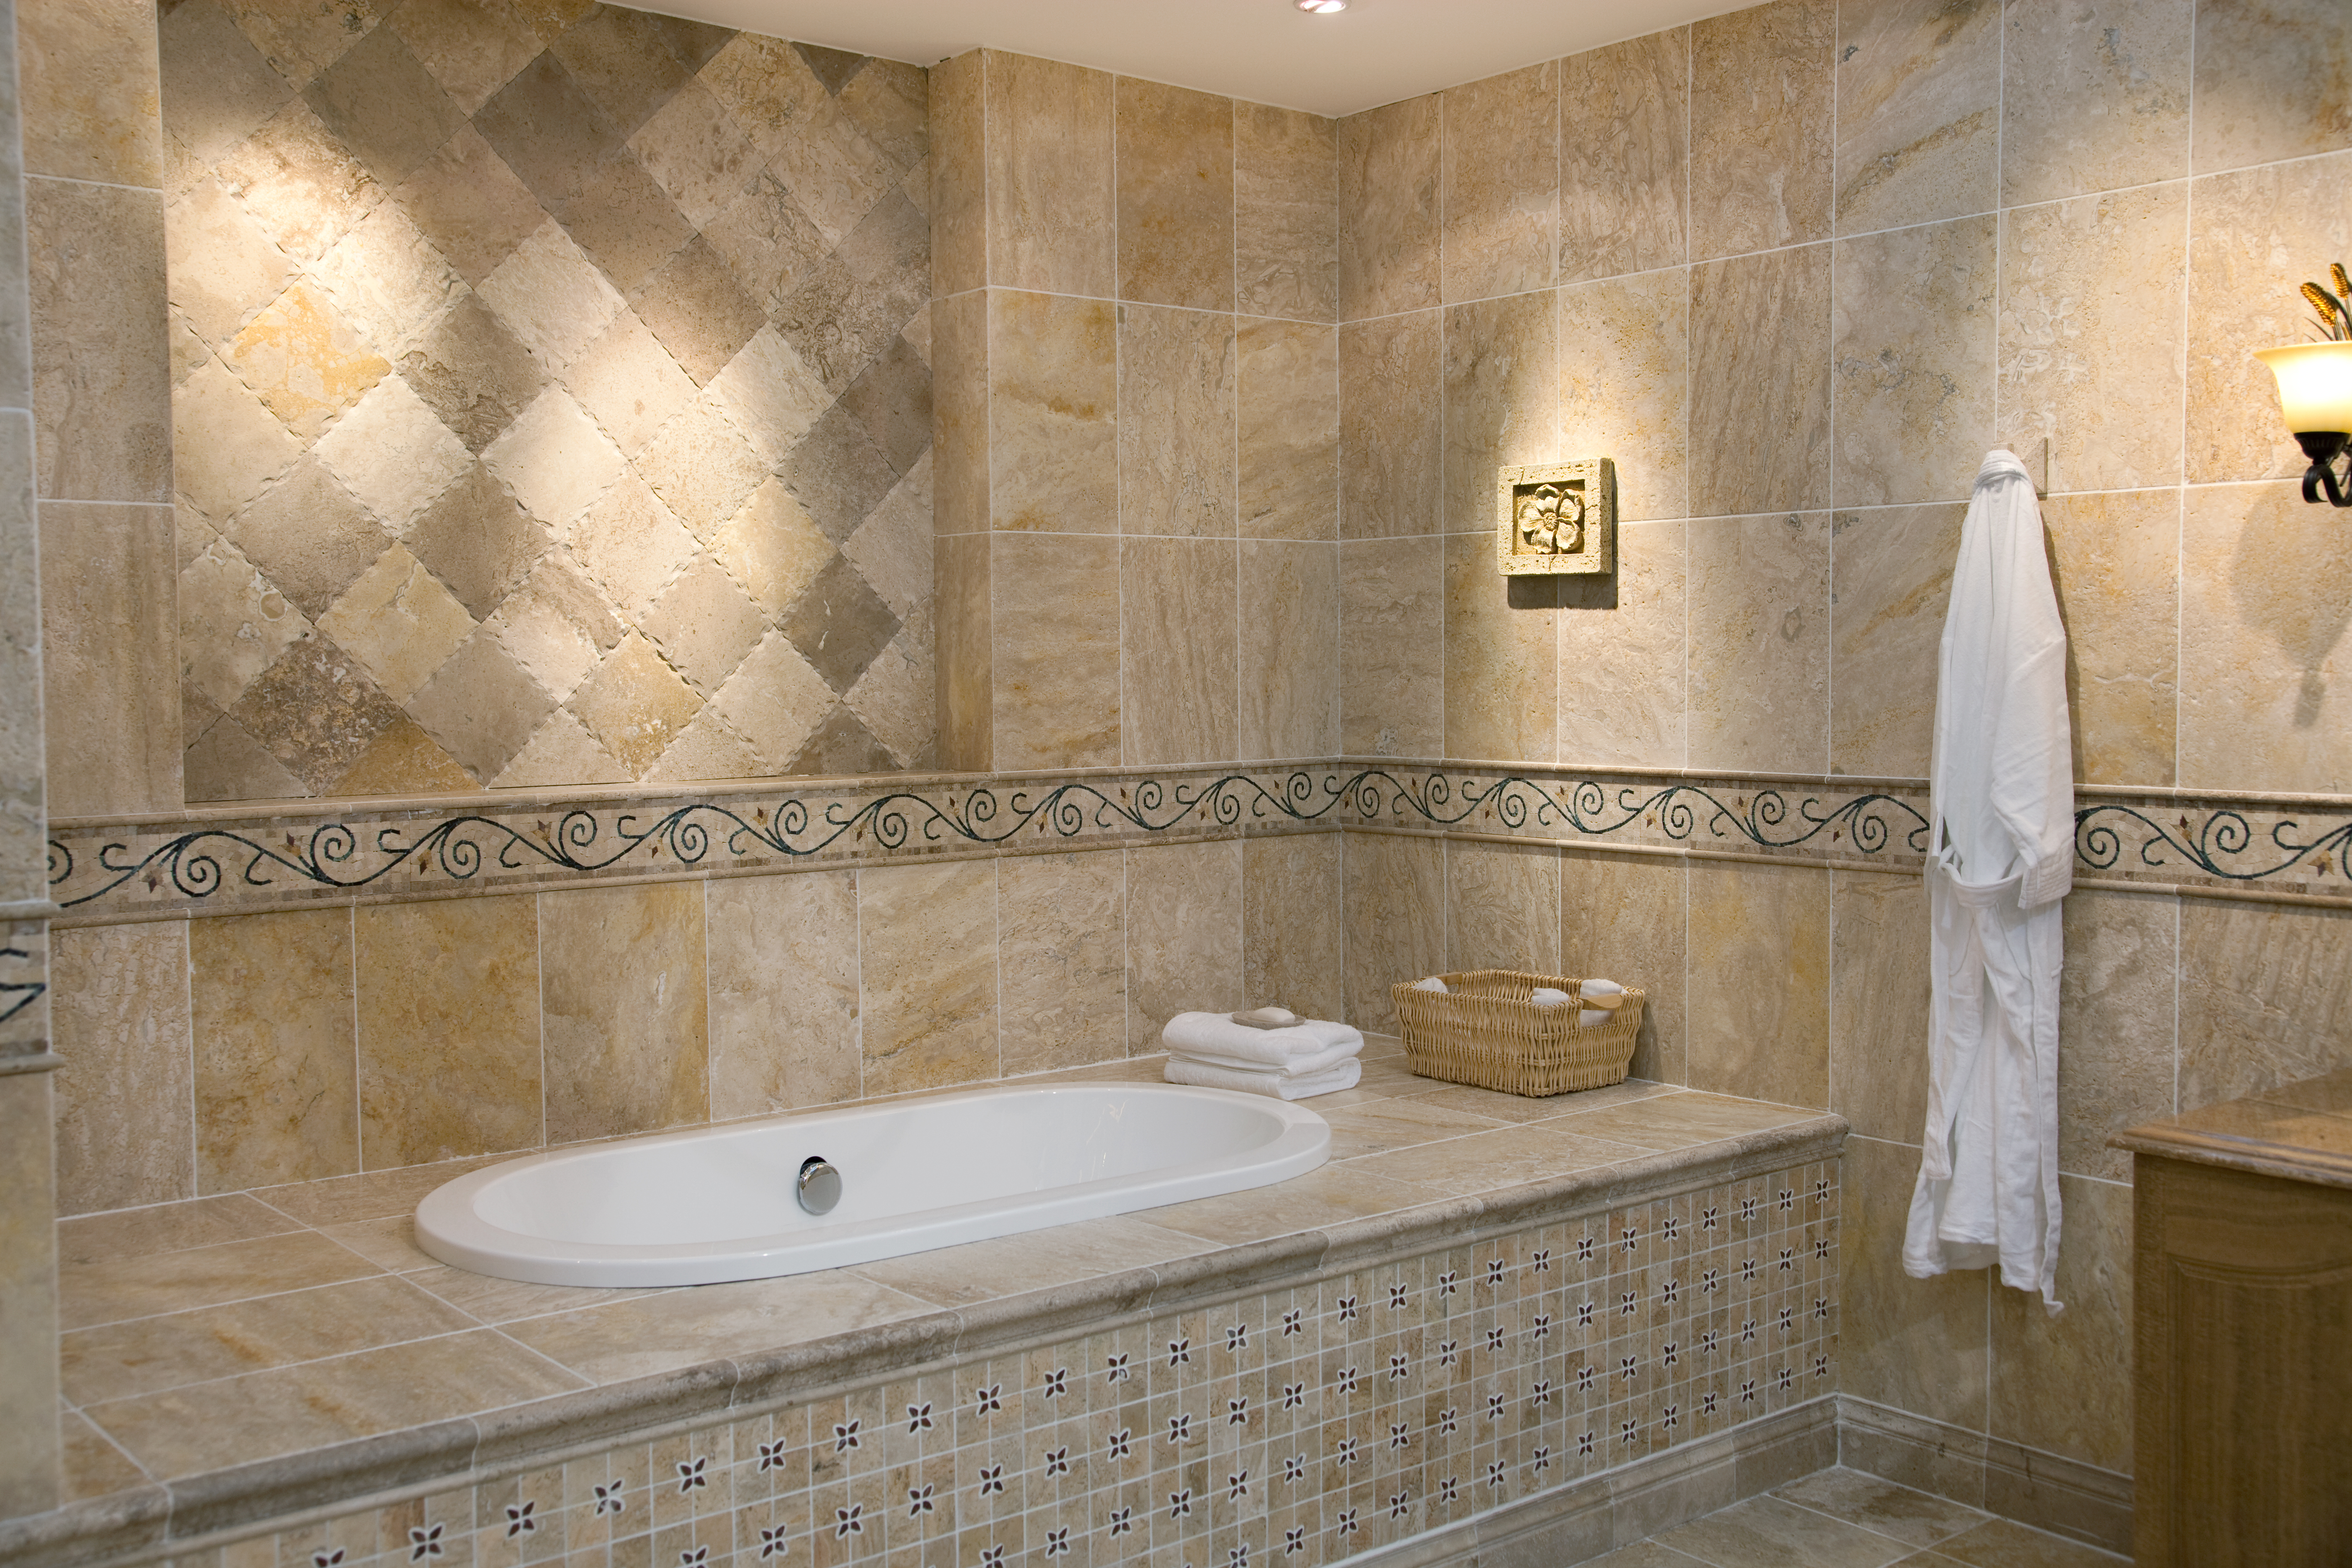 Bathroom setting with assorted traditional tiled areas